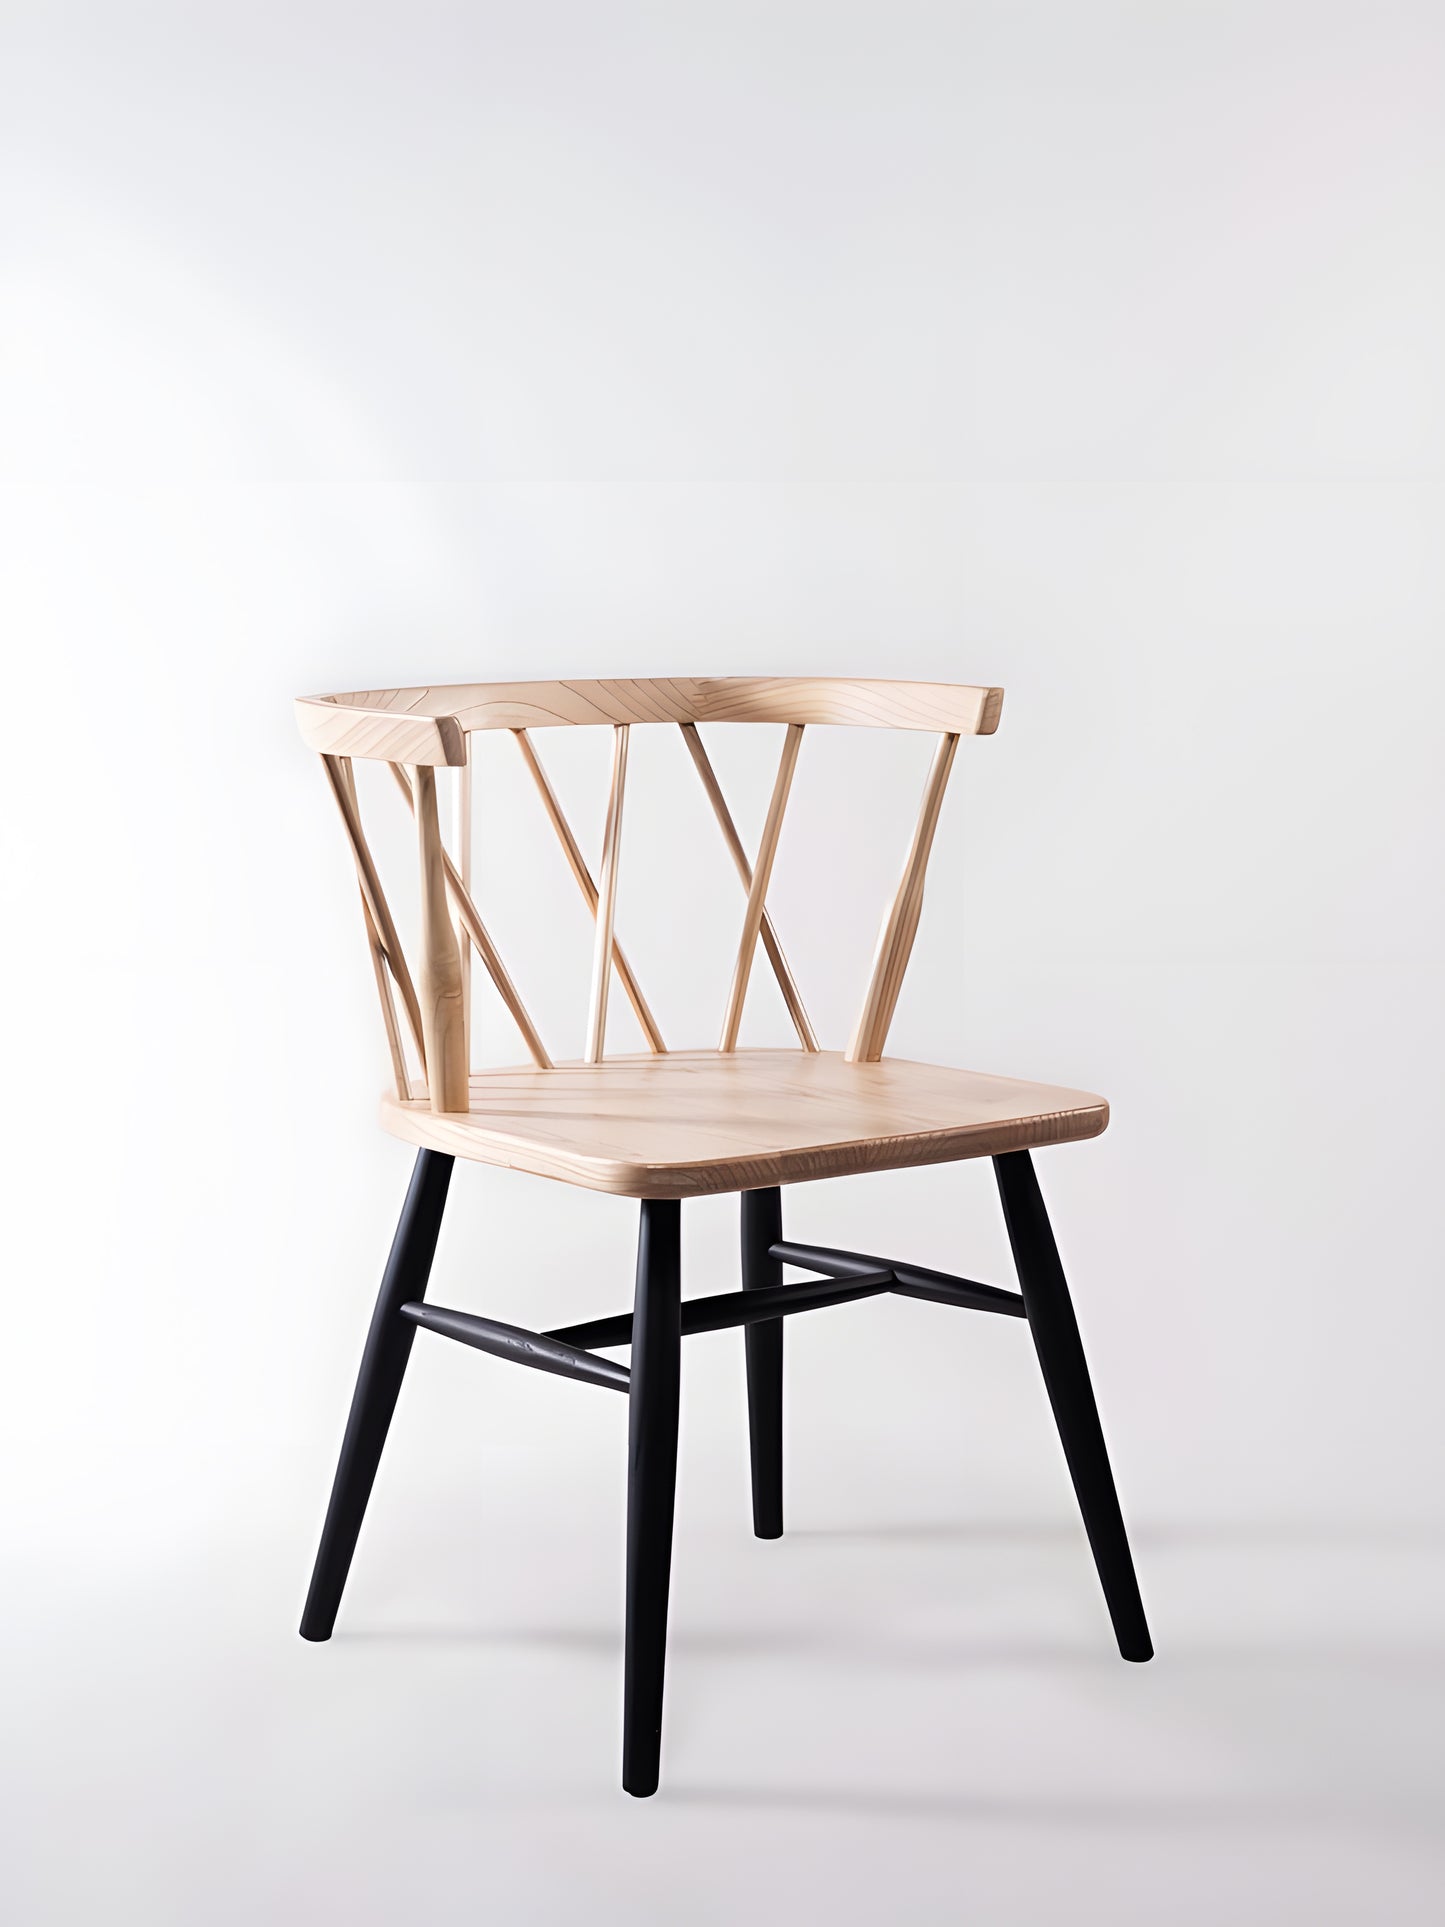 Fallas Sungkai Wood Cross Back Dining Chair with black painted legs front view by Mellowdays Furniture